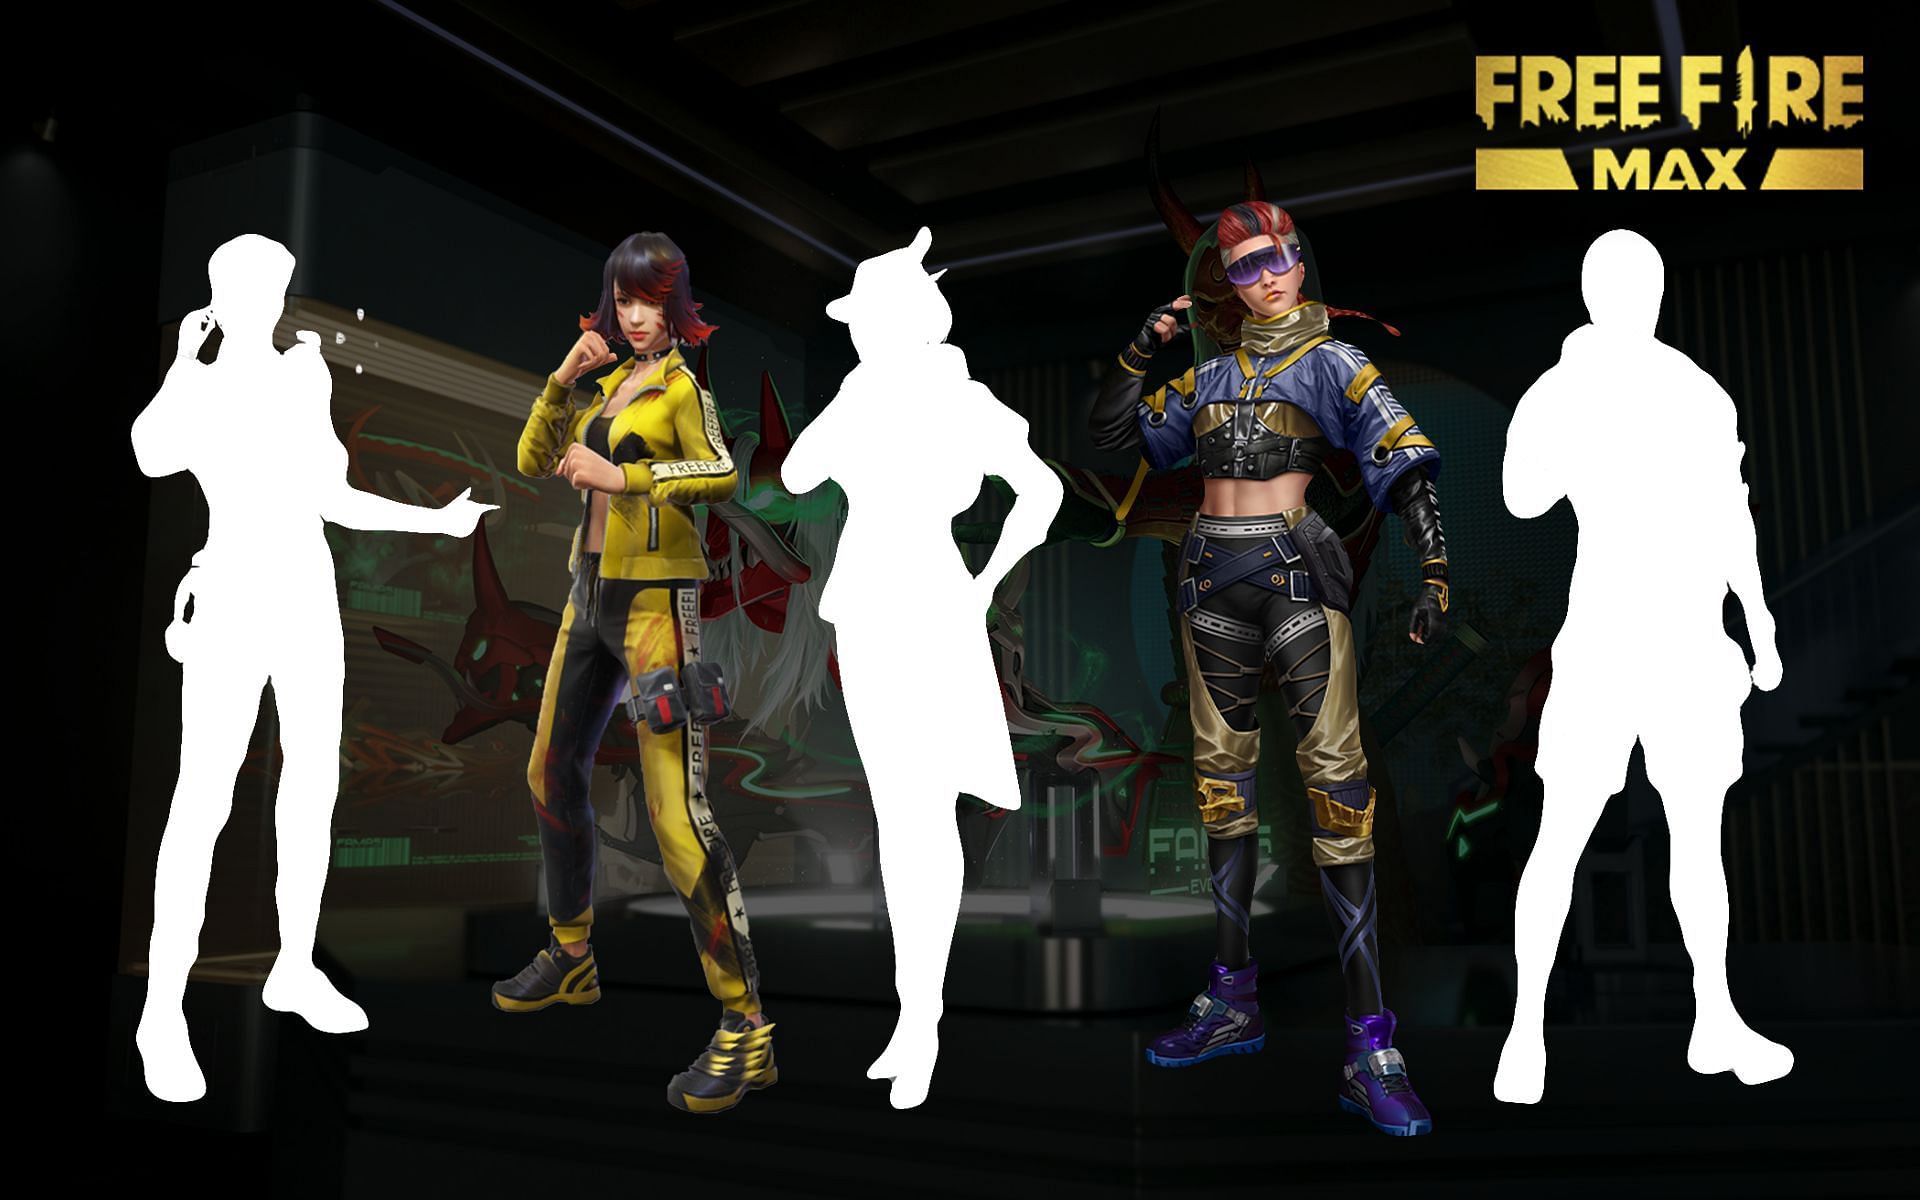 These characters are some of the most powerful in Free Fire MAX (Image via Sportskeeda)